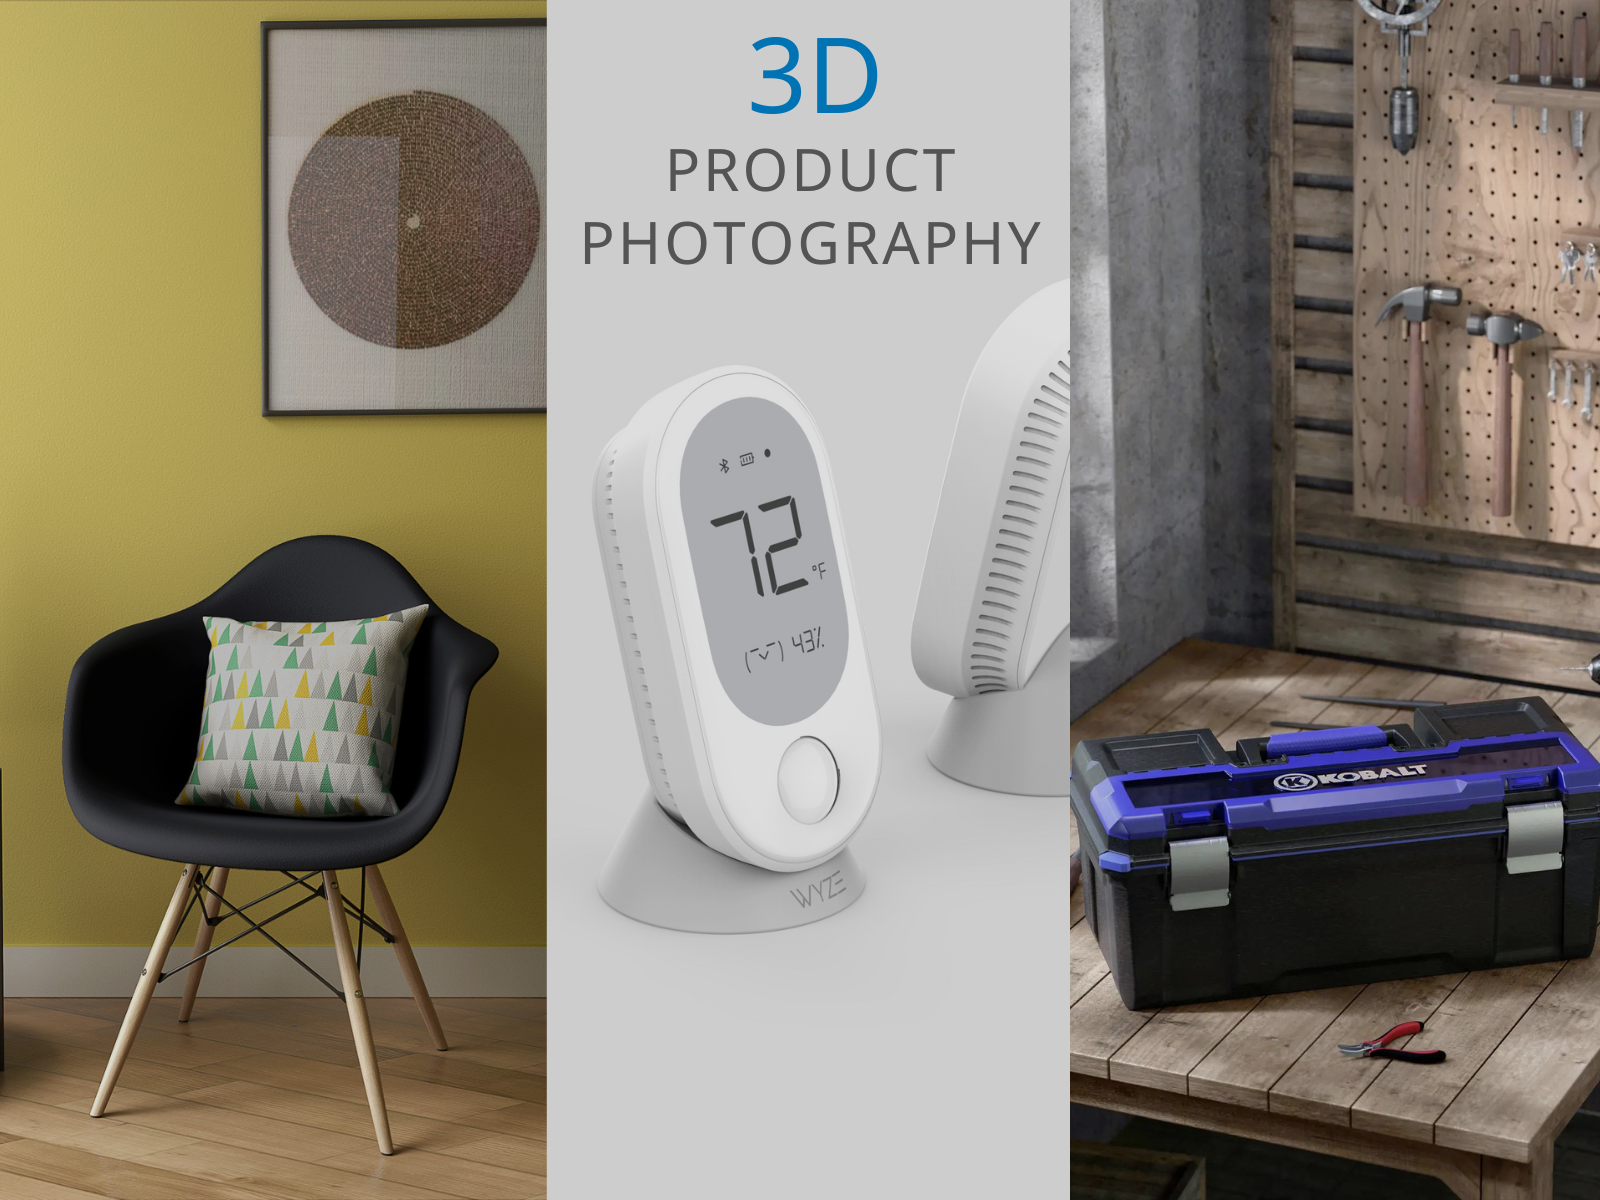 3D Product Photography